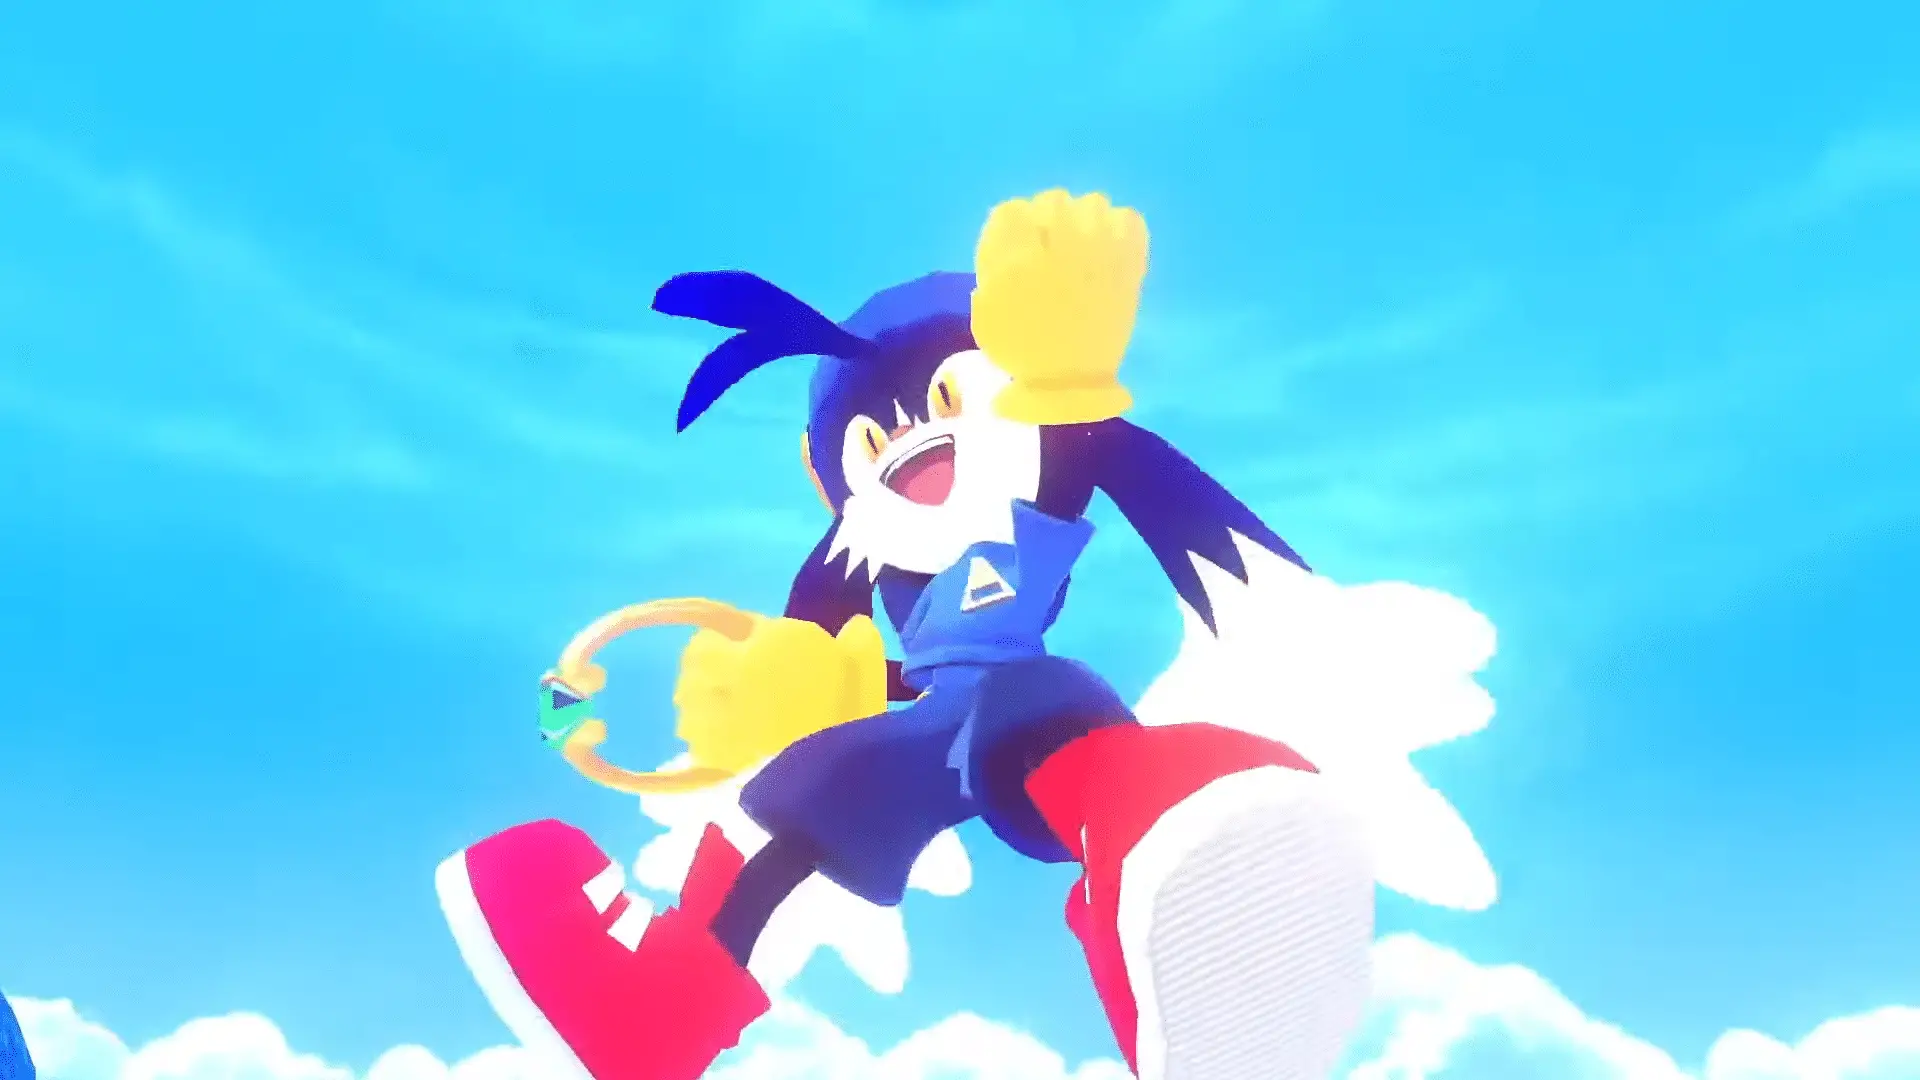 Klonoa Phantasy Reverie Series Receving Physical Editions In Japan & Europe; No Word On North America